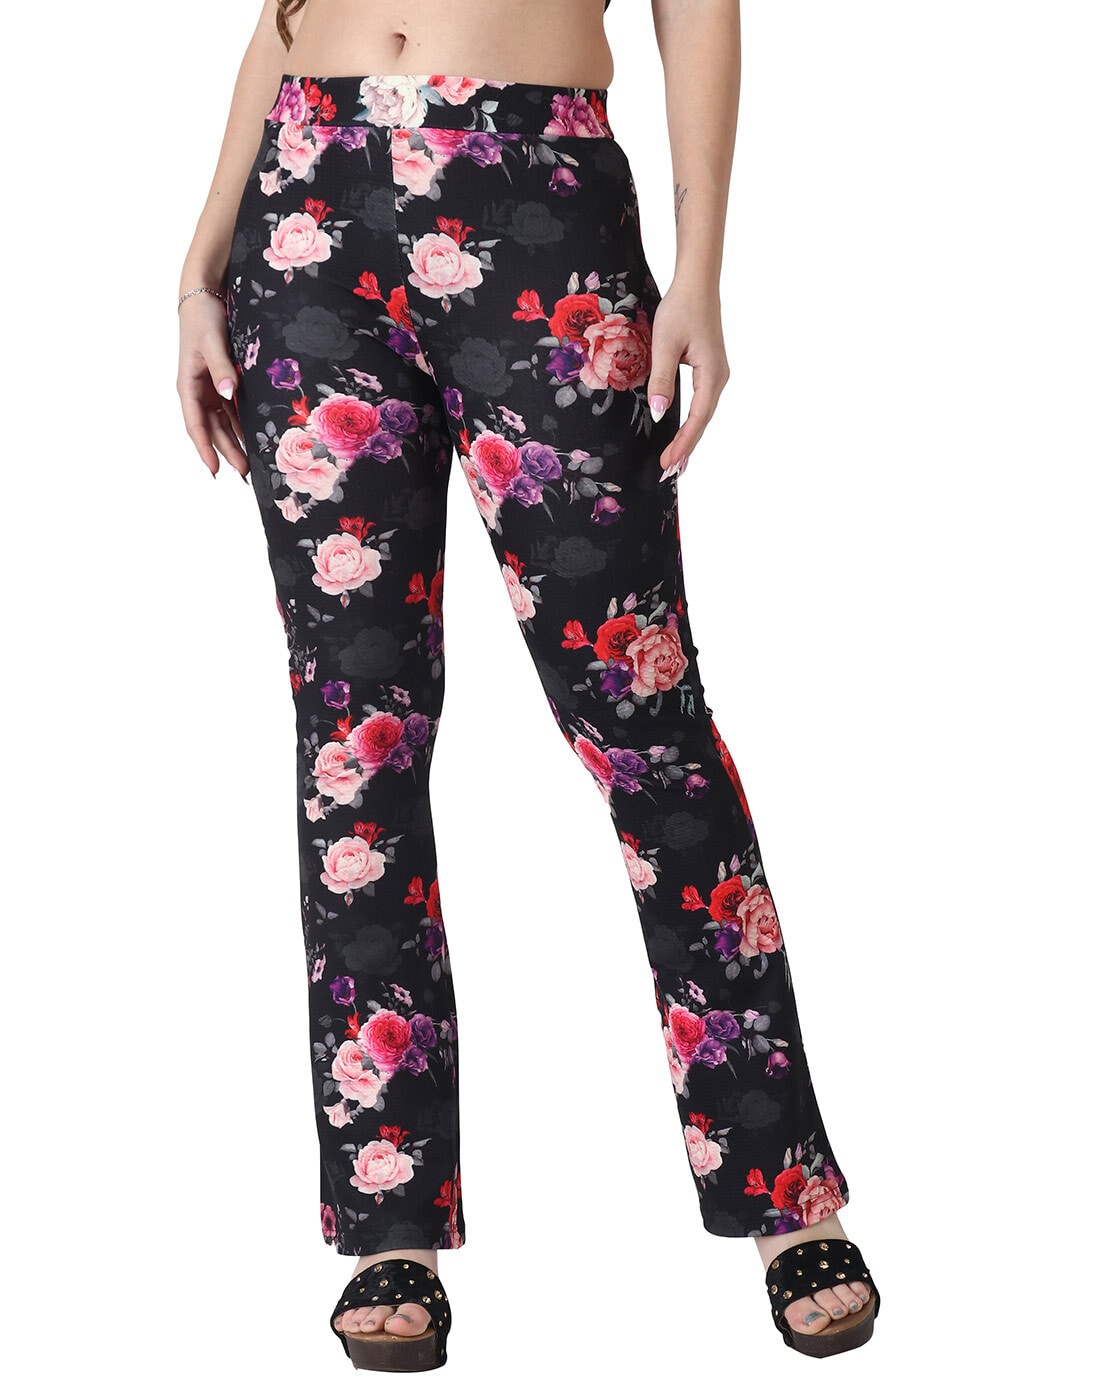 Plus Size Black Floral Luxe High Waist Pants Online in India | Amydus